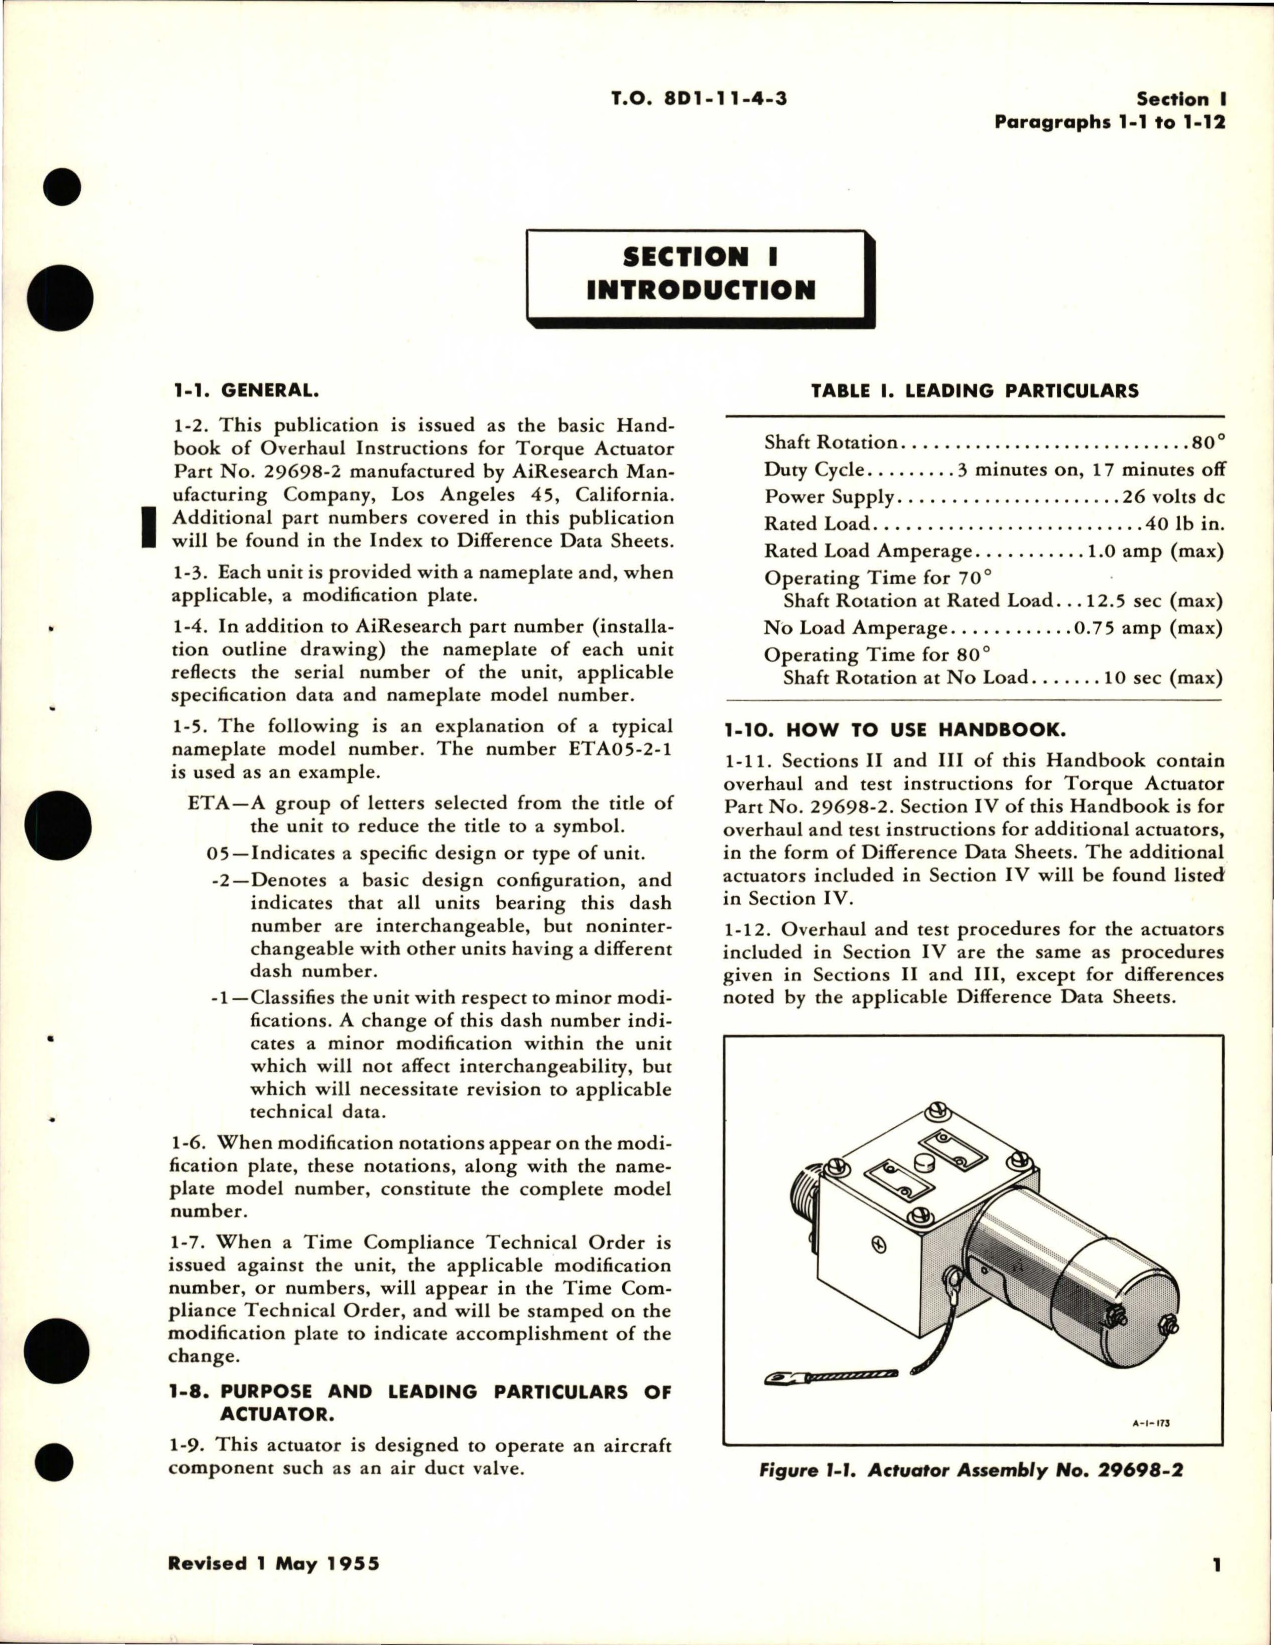 Sample page 5 from AirCorps Library document: Overhaul Instructions for Electro-Mechanical Torque Actuators 